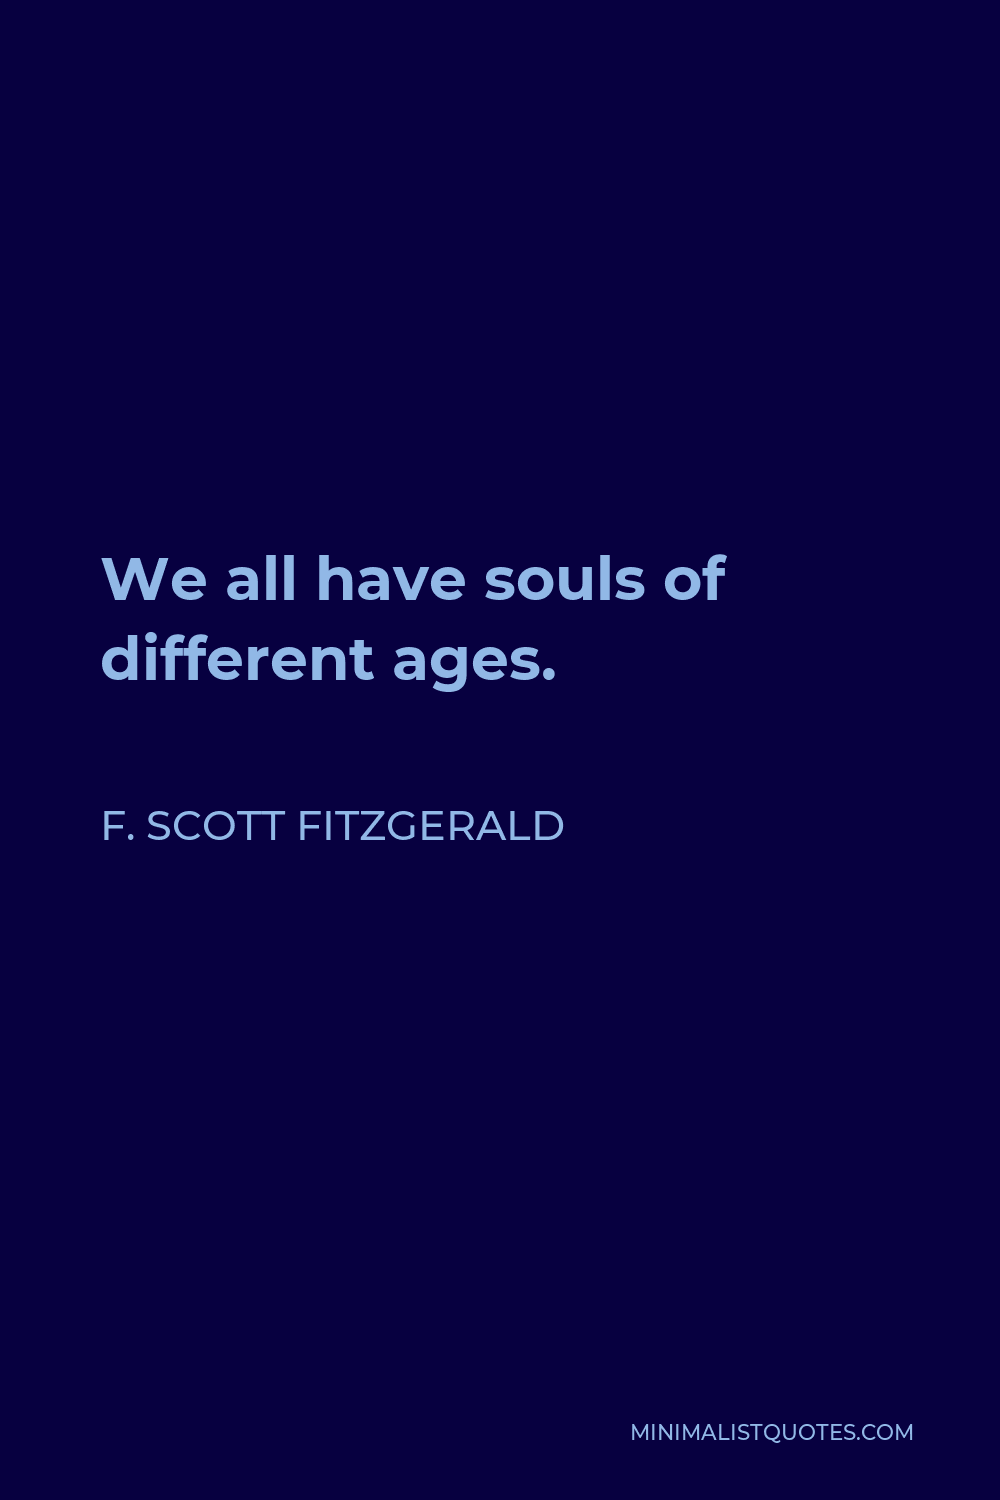 F. Scott Fitzgerald Quote - We all have souls of different ages.